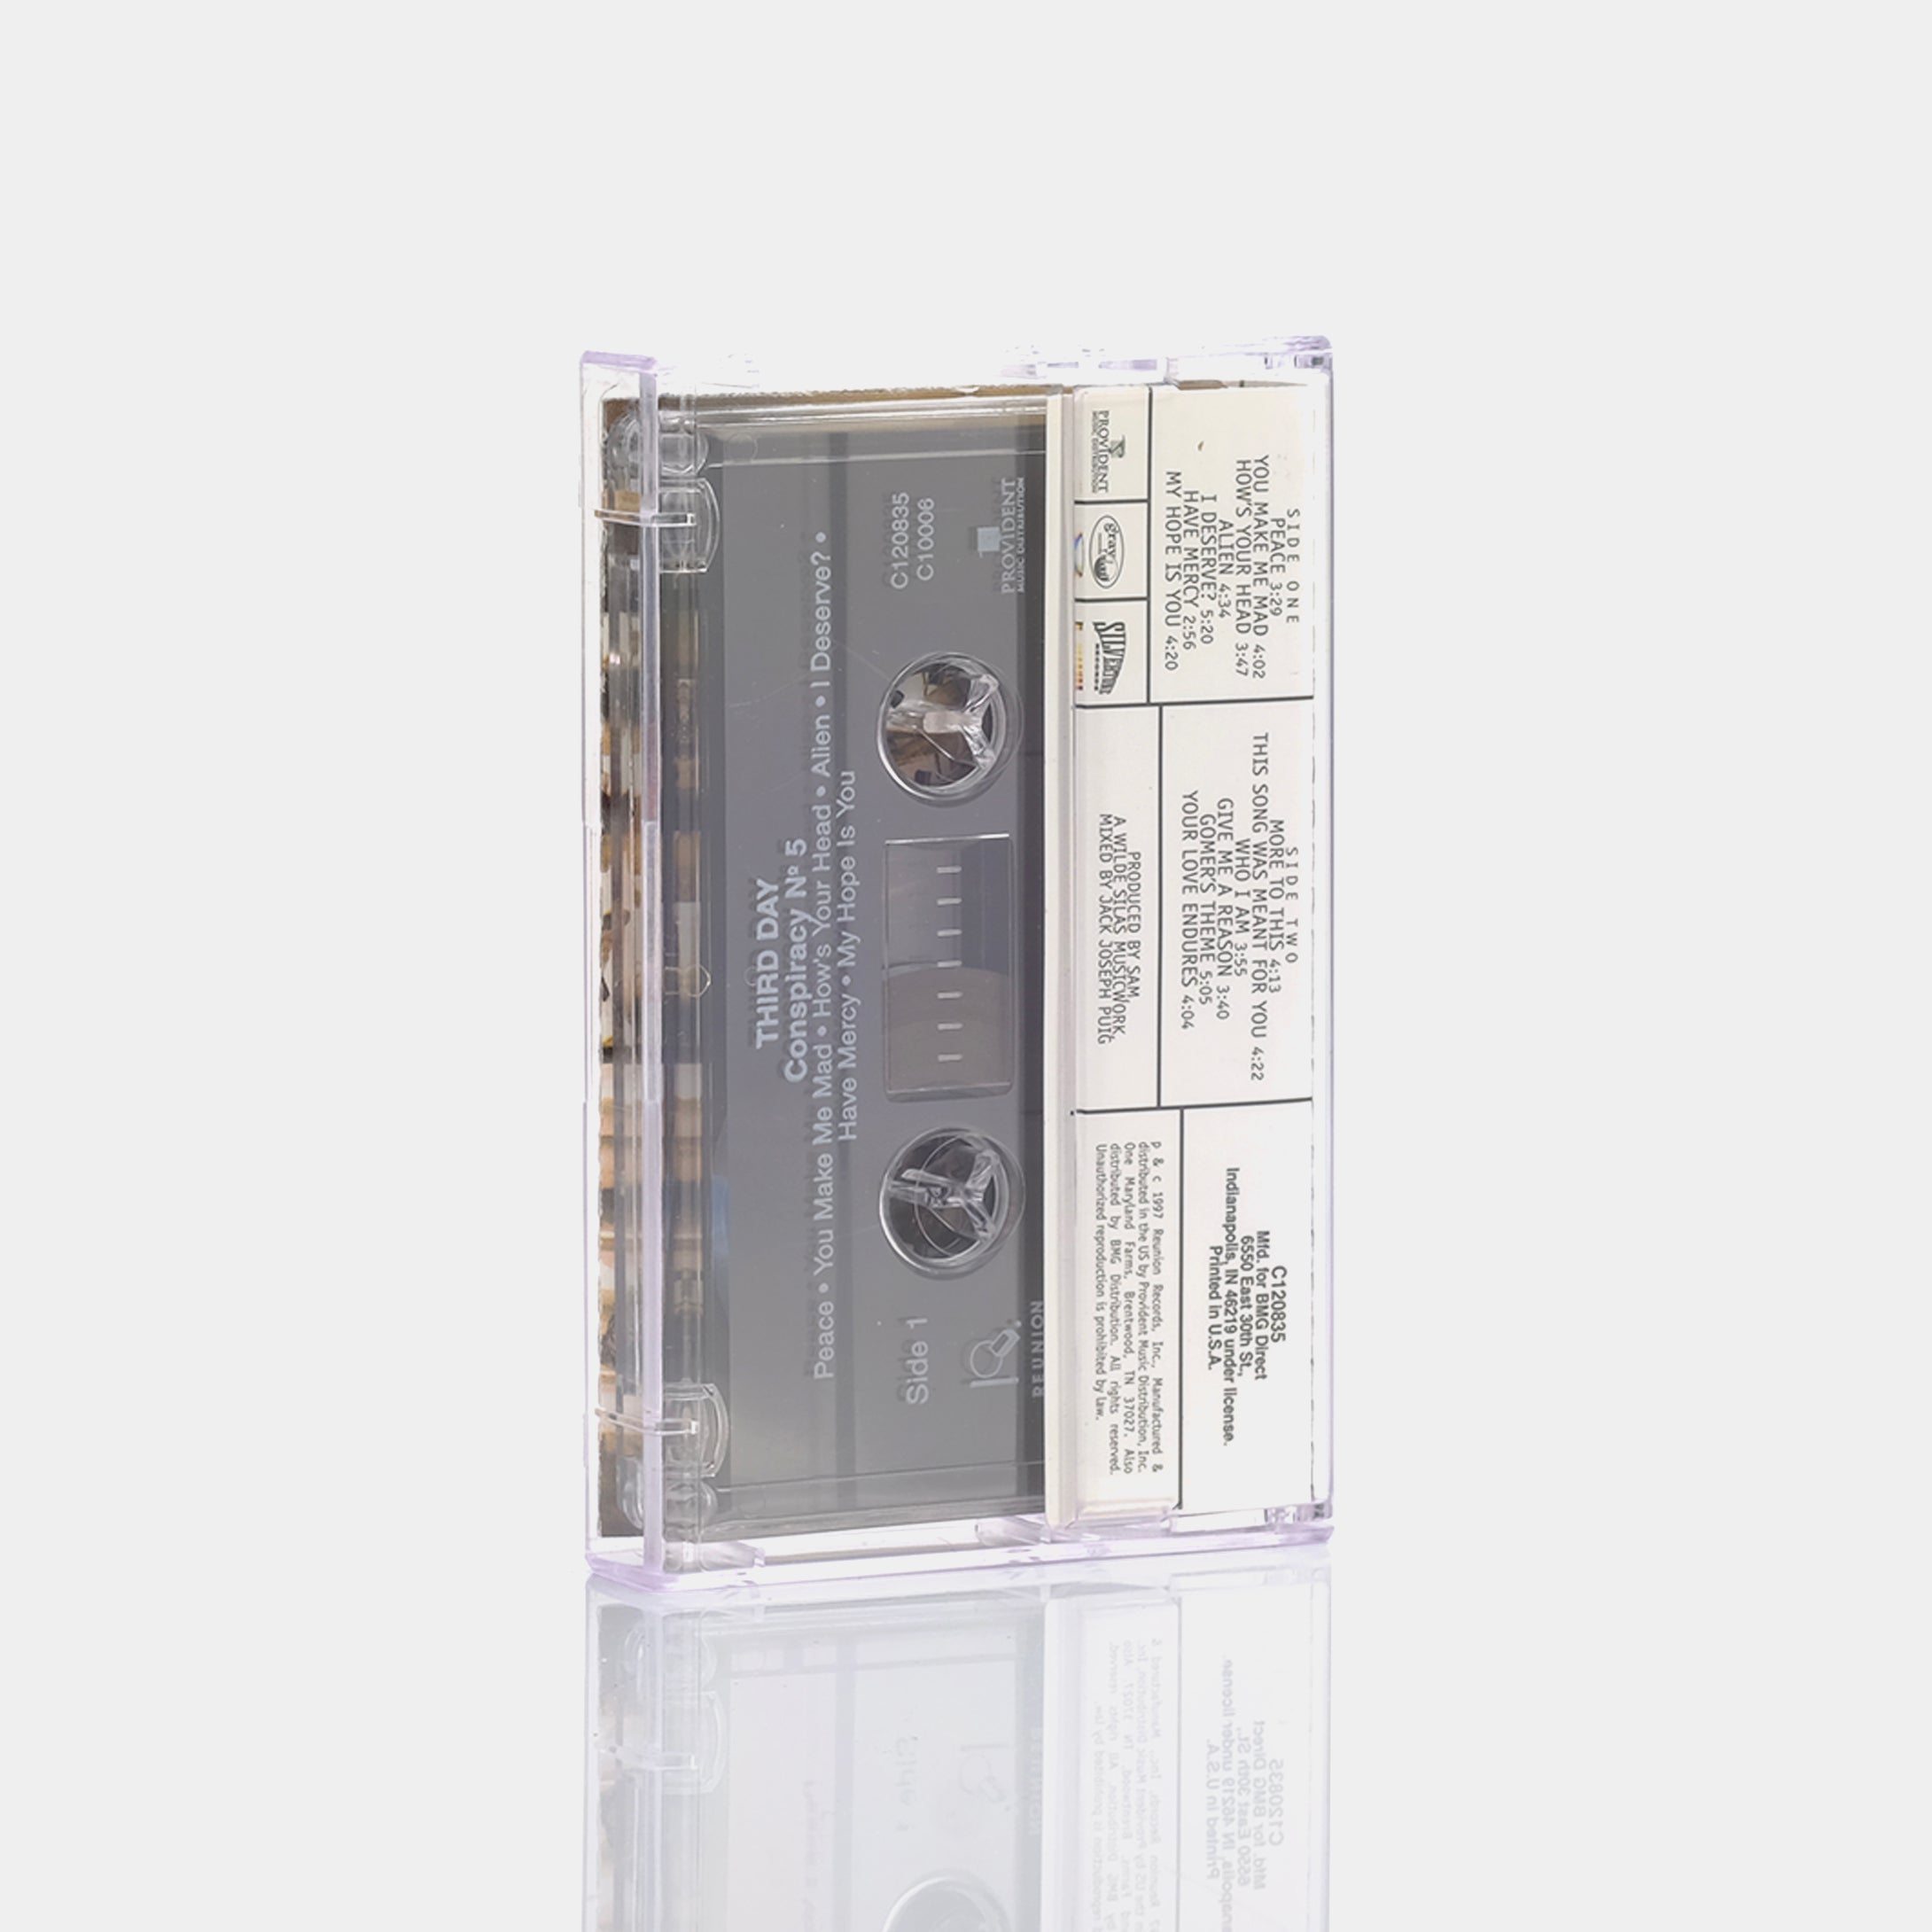 Third Day - Conspiracy No. 5 Cassette Tape